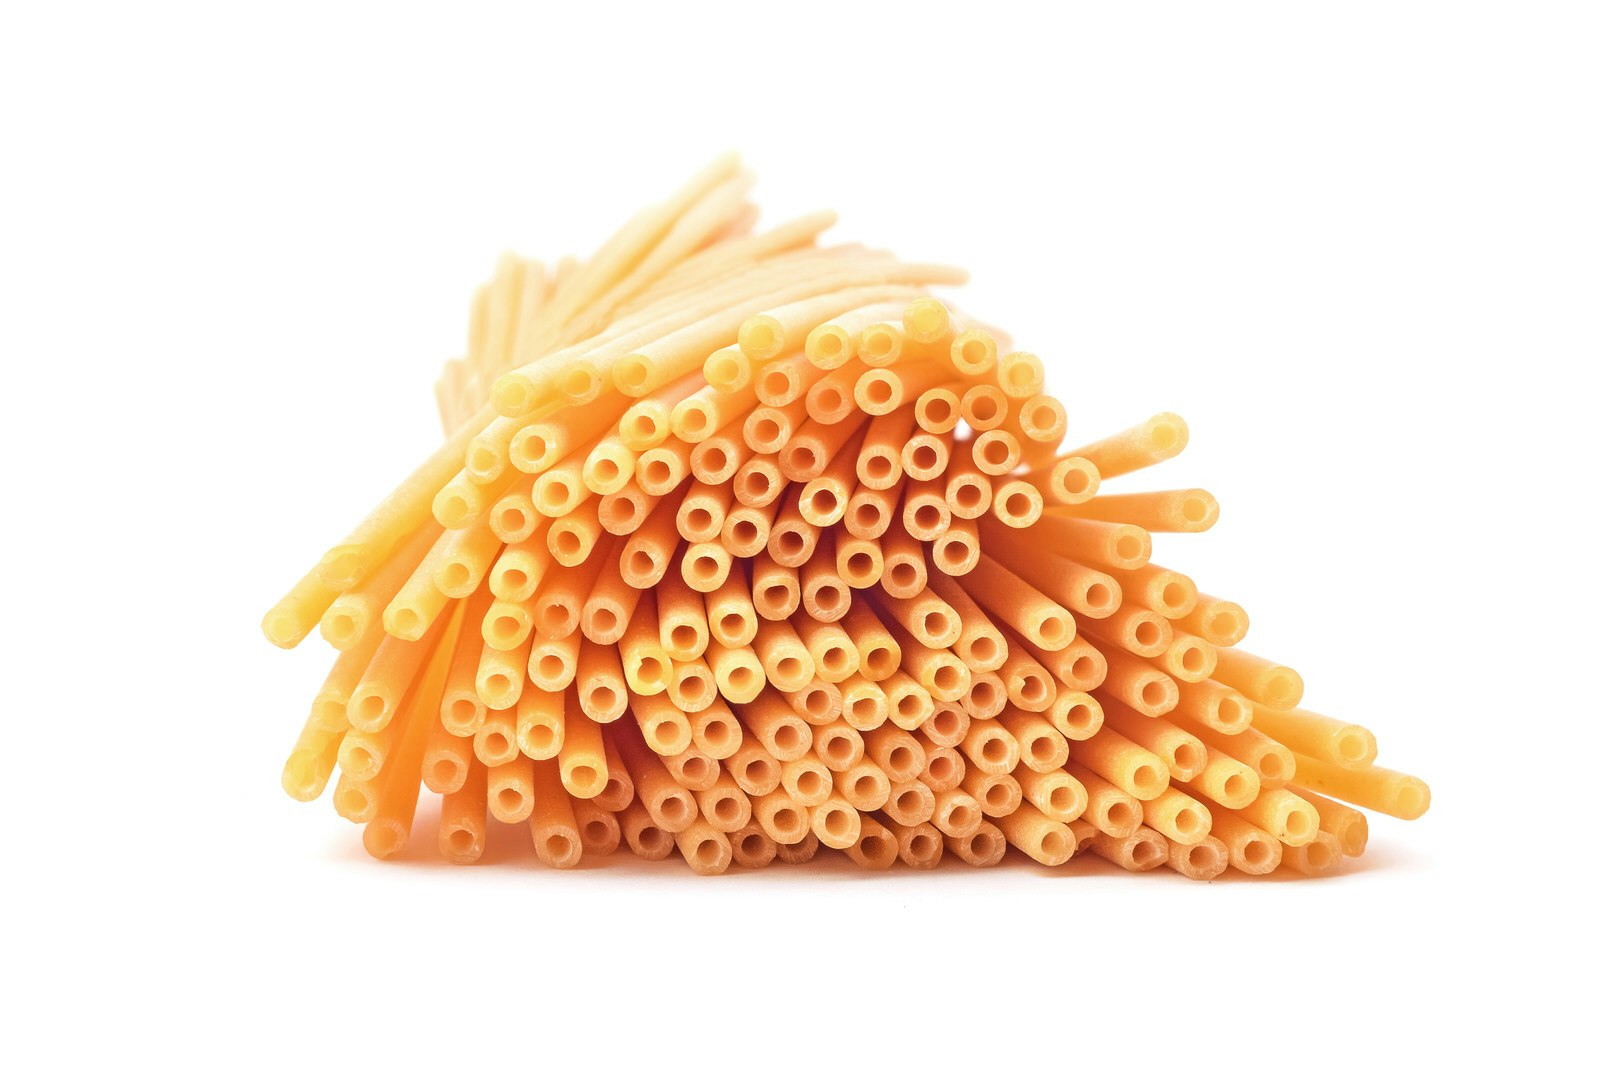 A shot of a handful of bucatini pasta straws against a stark white background